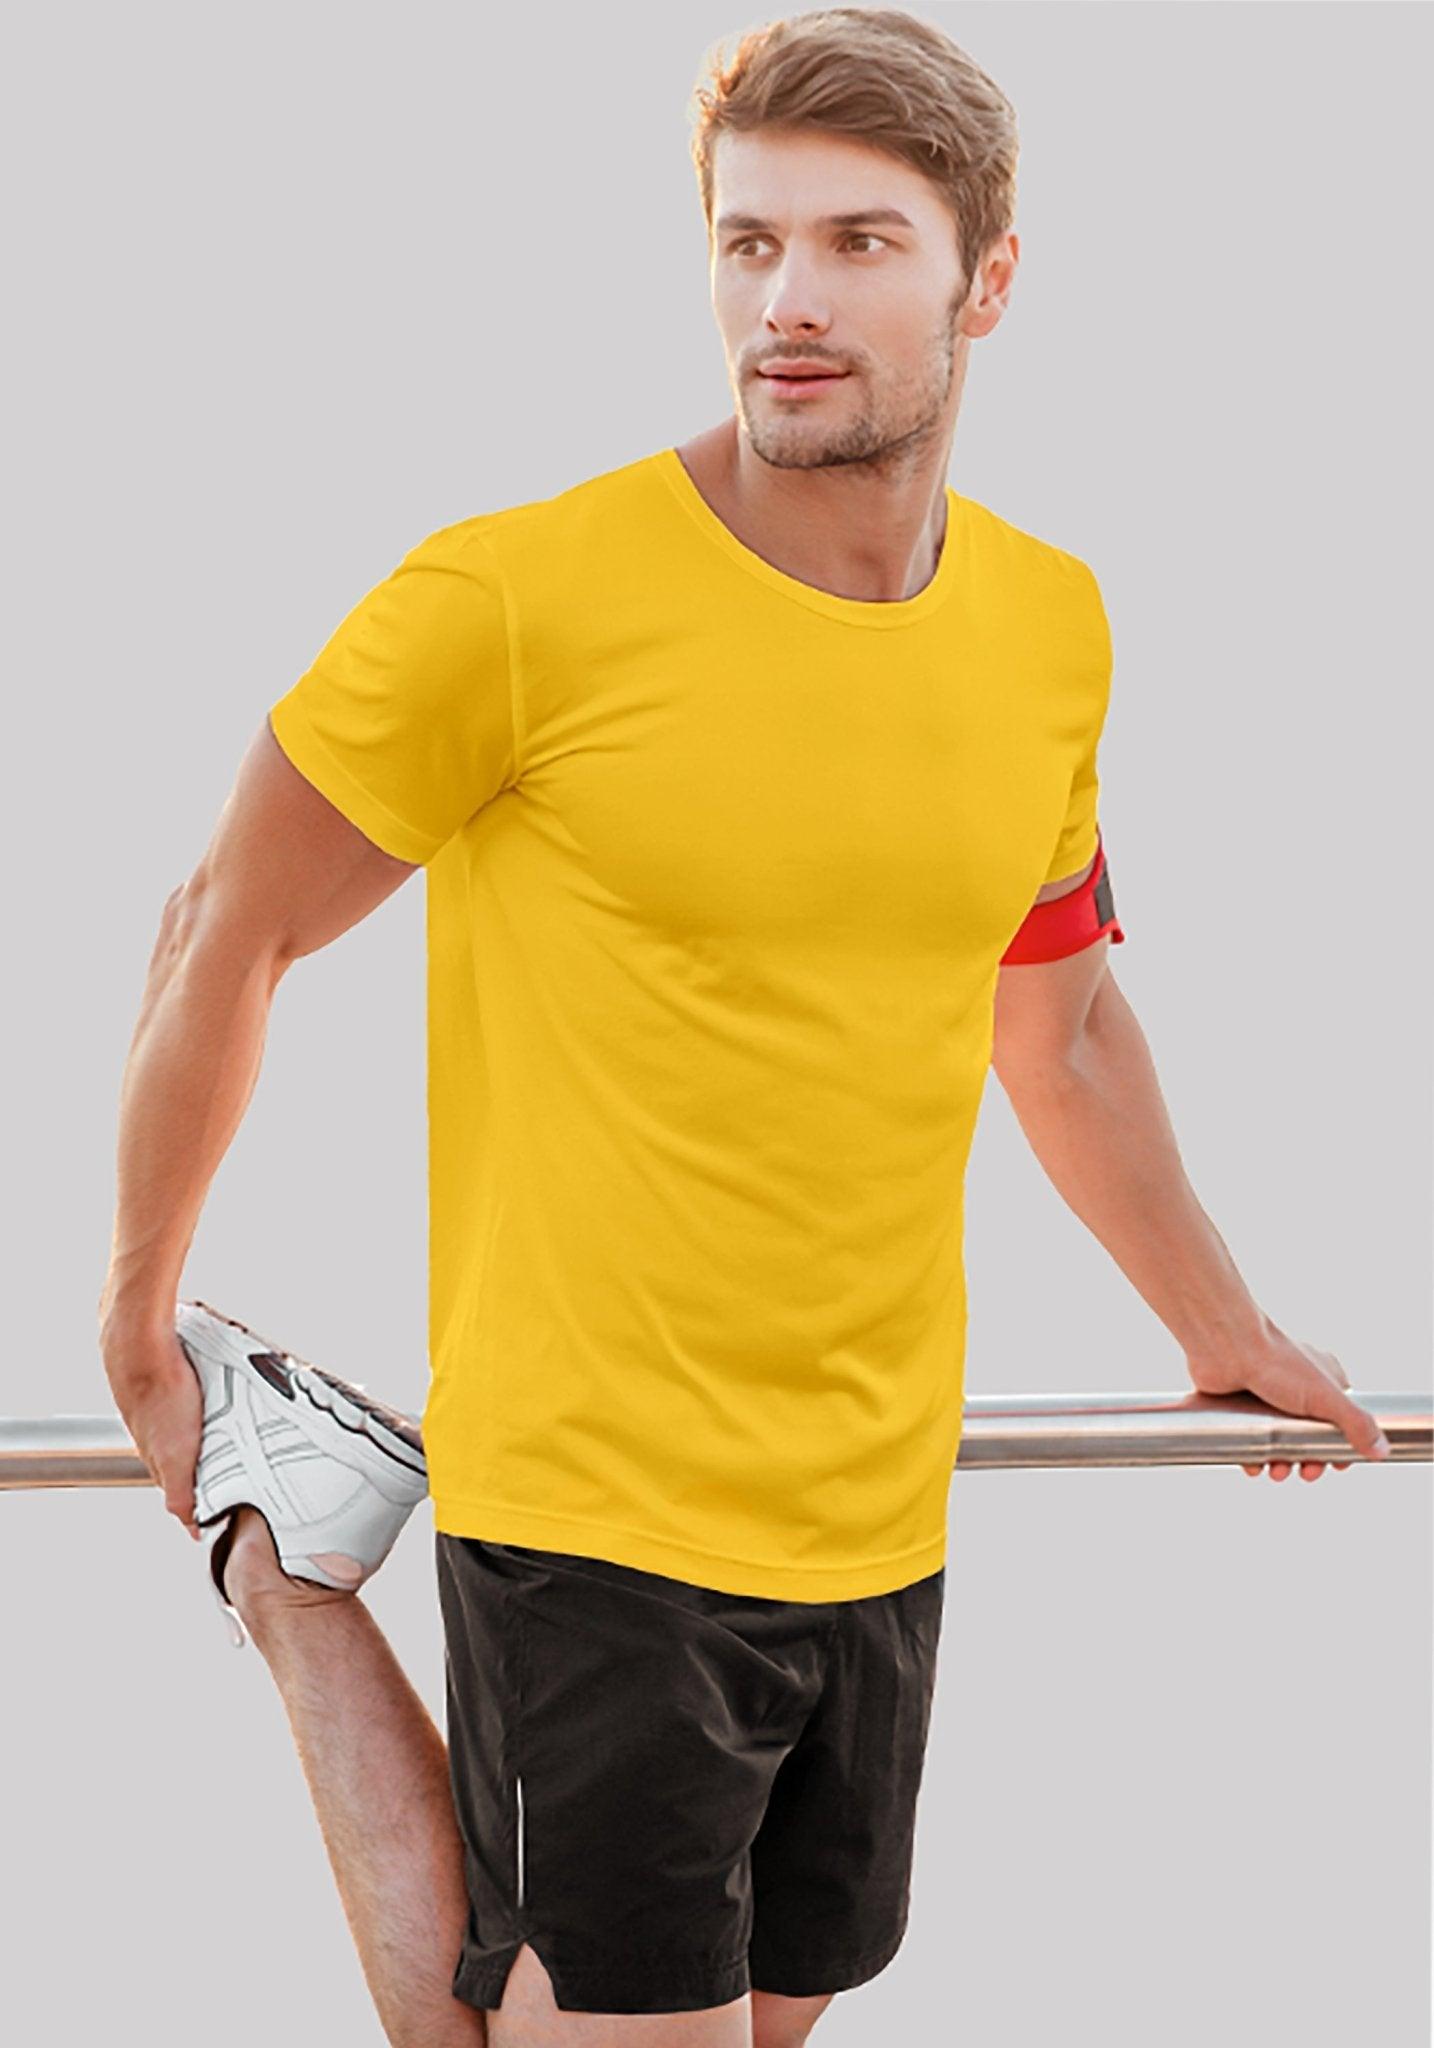 Solid Plain T Shirt For Men In Fire Yellow Colour Variant